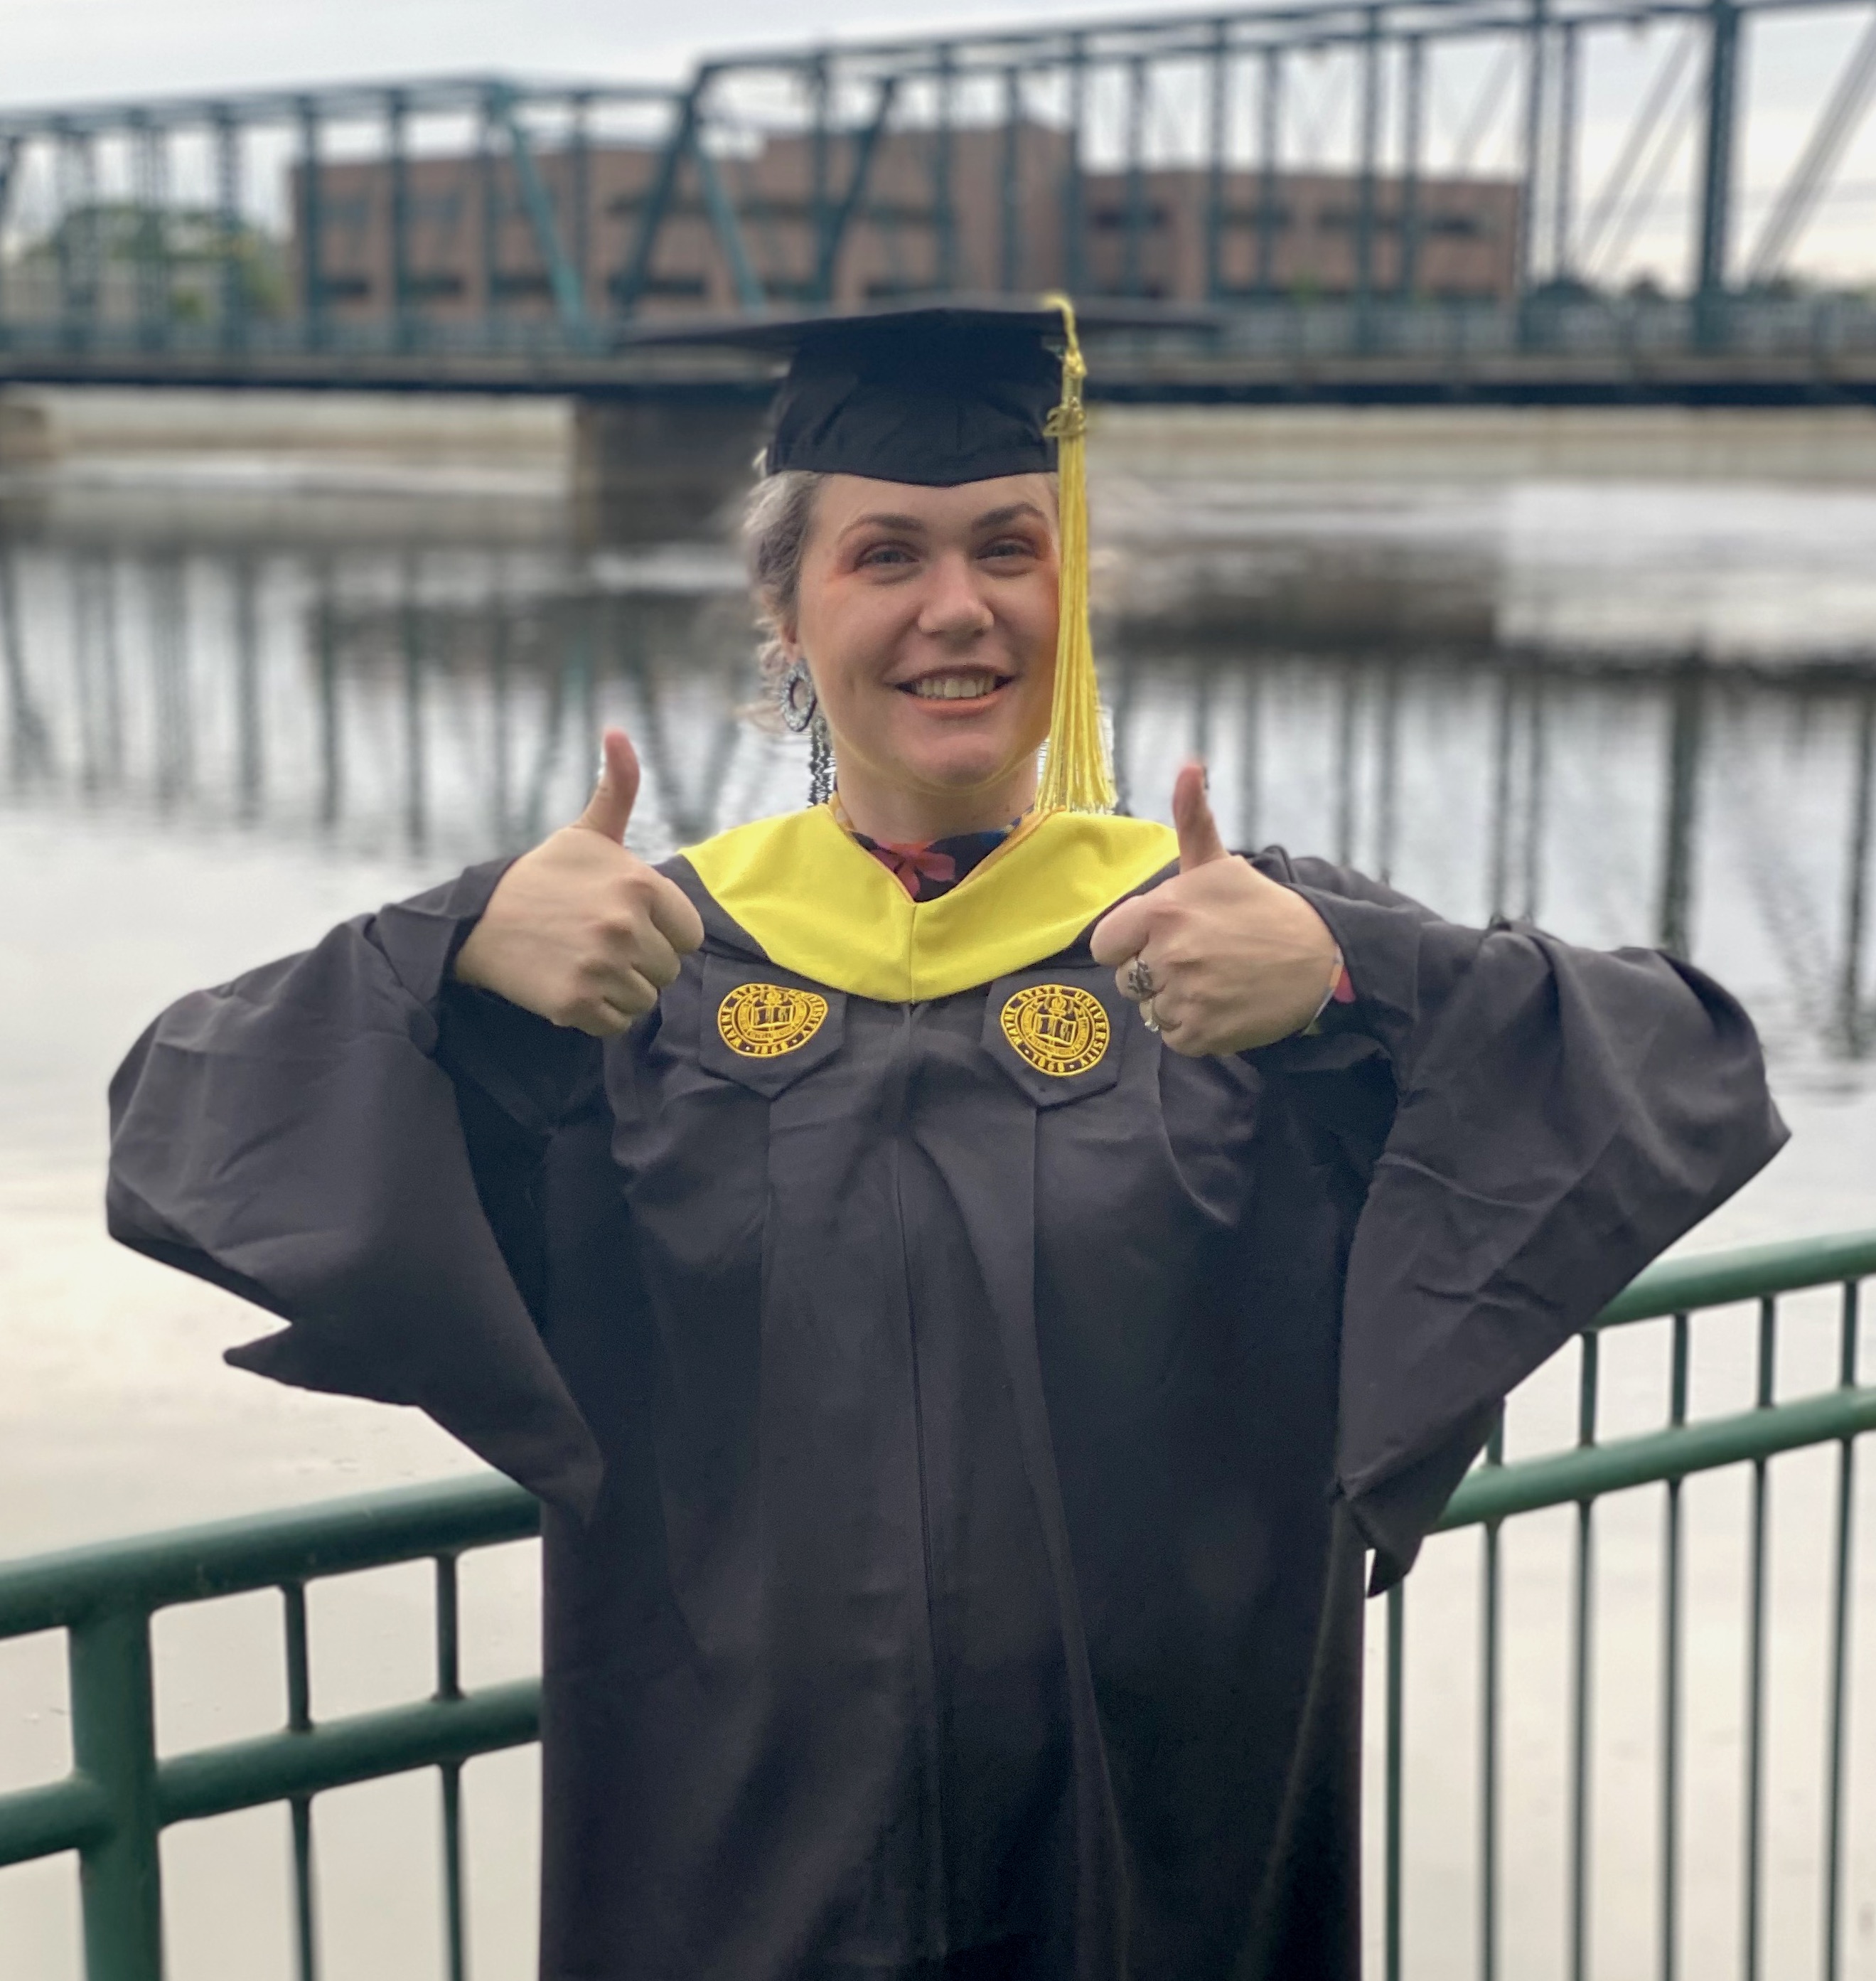 WSU alumna Ginny Schneider is pictured in her graduation cap and gown giving a big smile and thumbs up to the camera.